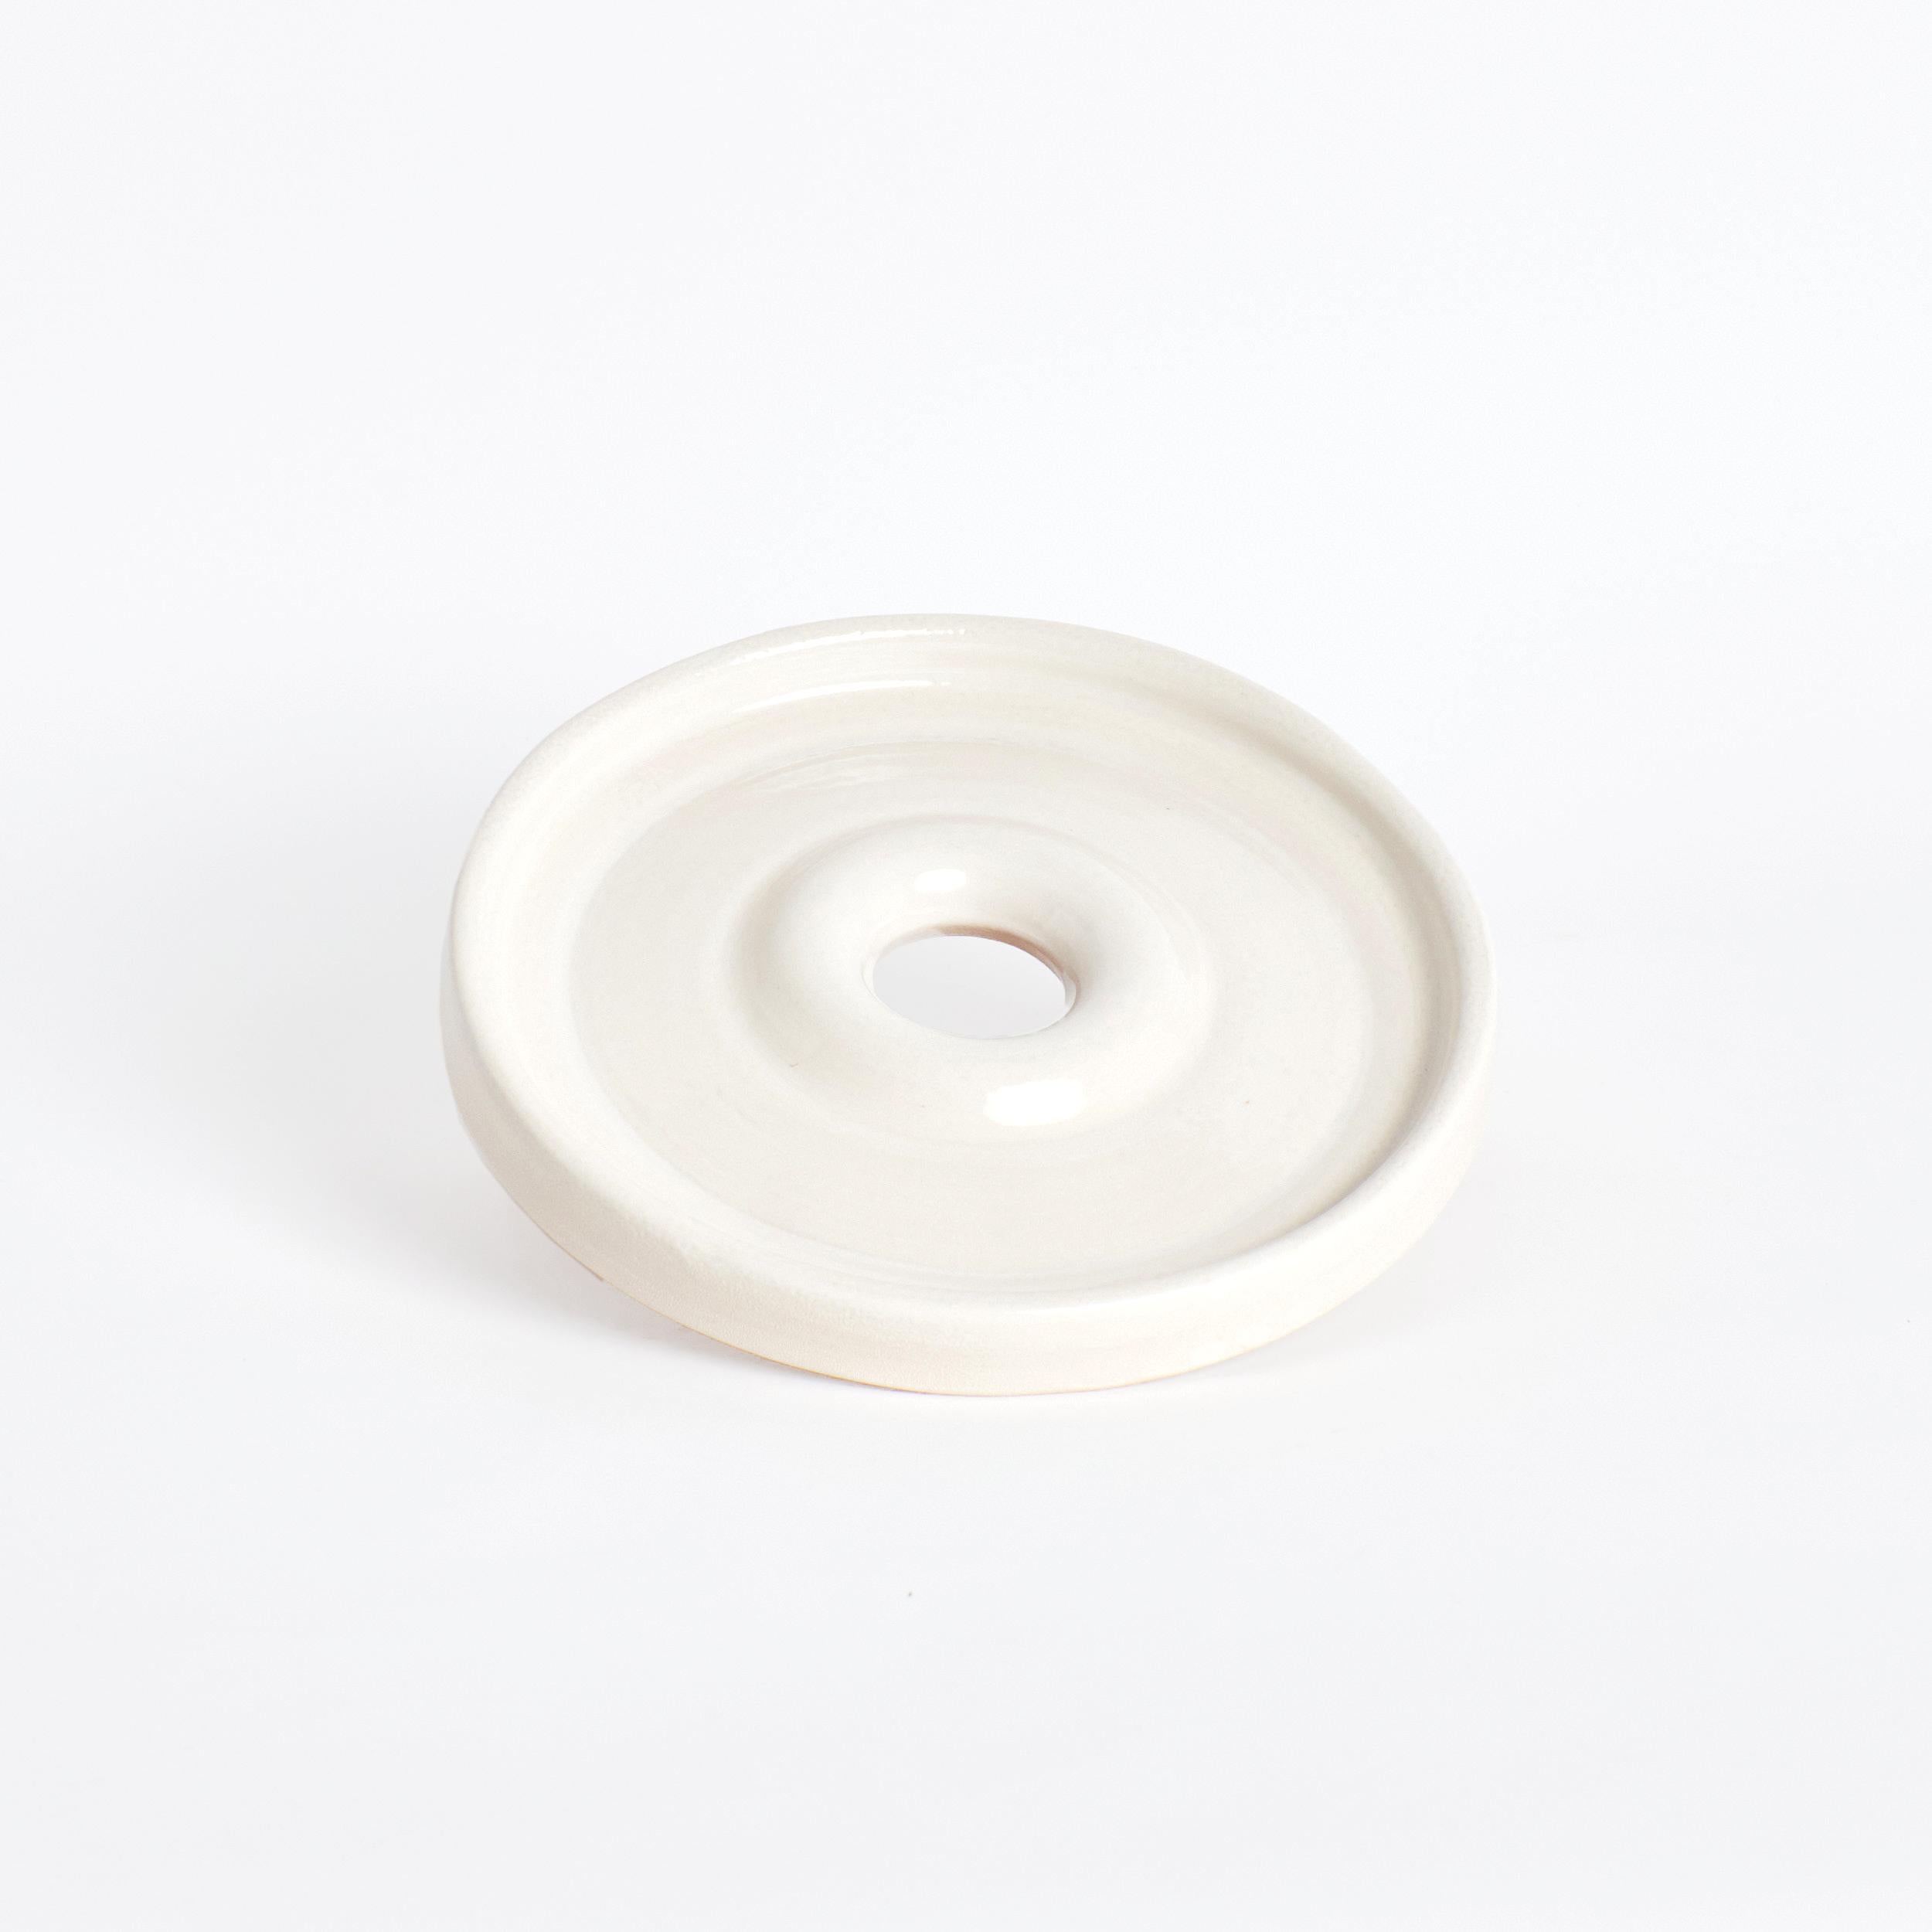 Aveiro Plate in Cream by Project 213A
Dimensions: D 28 x W 28 x H 3 cm
Materials: Ceramic. 

This plate is hand crafted and sculpted on a ceramic wheel. Finished with a hole in its centre the plate arranged the food placed on it playfully around